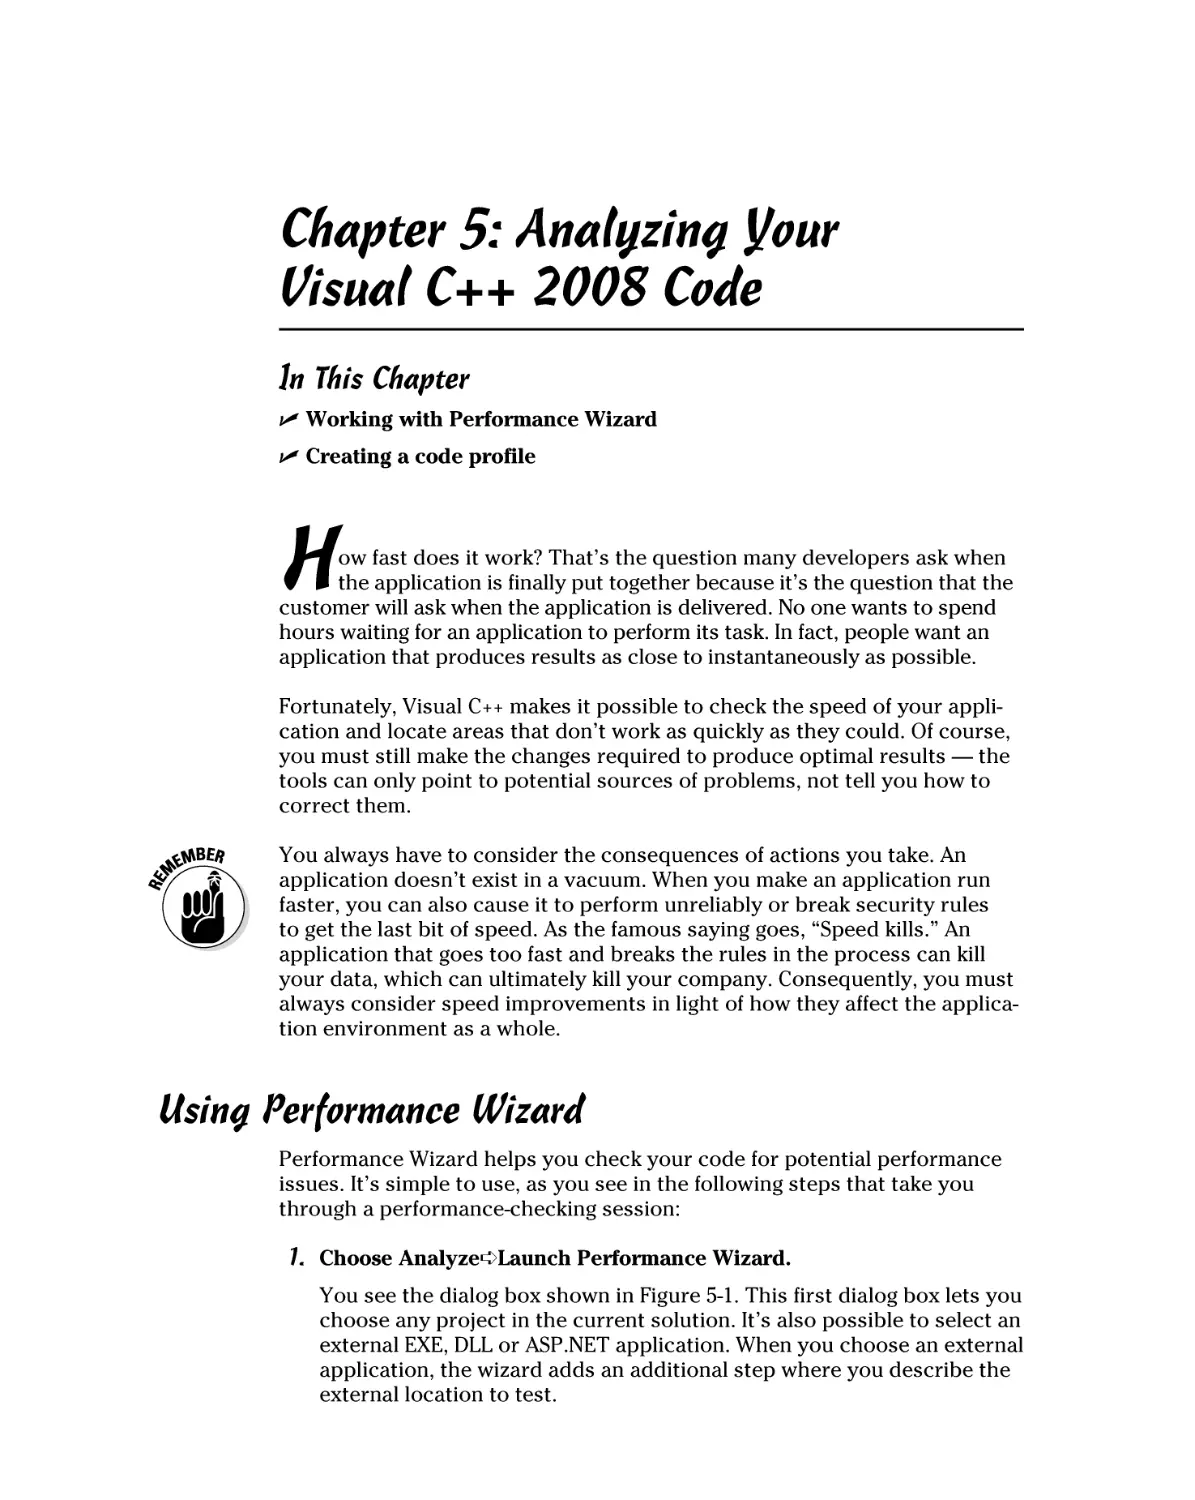 Chapter 5
Using Performance Wizard